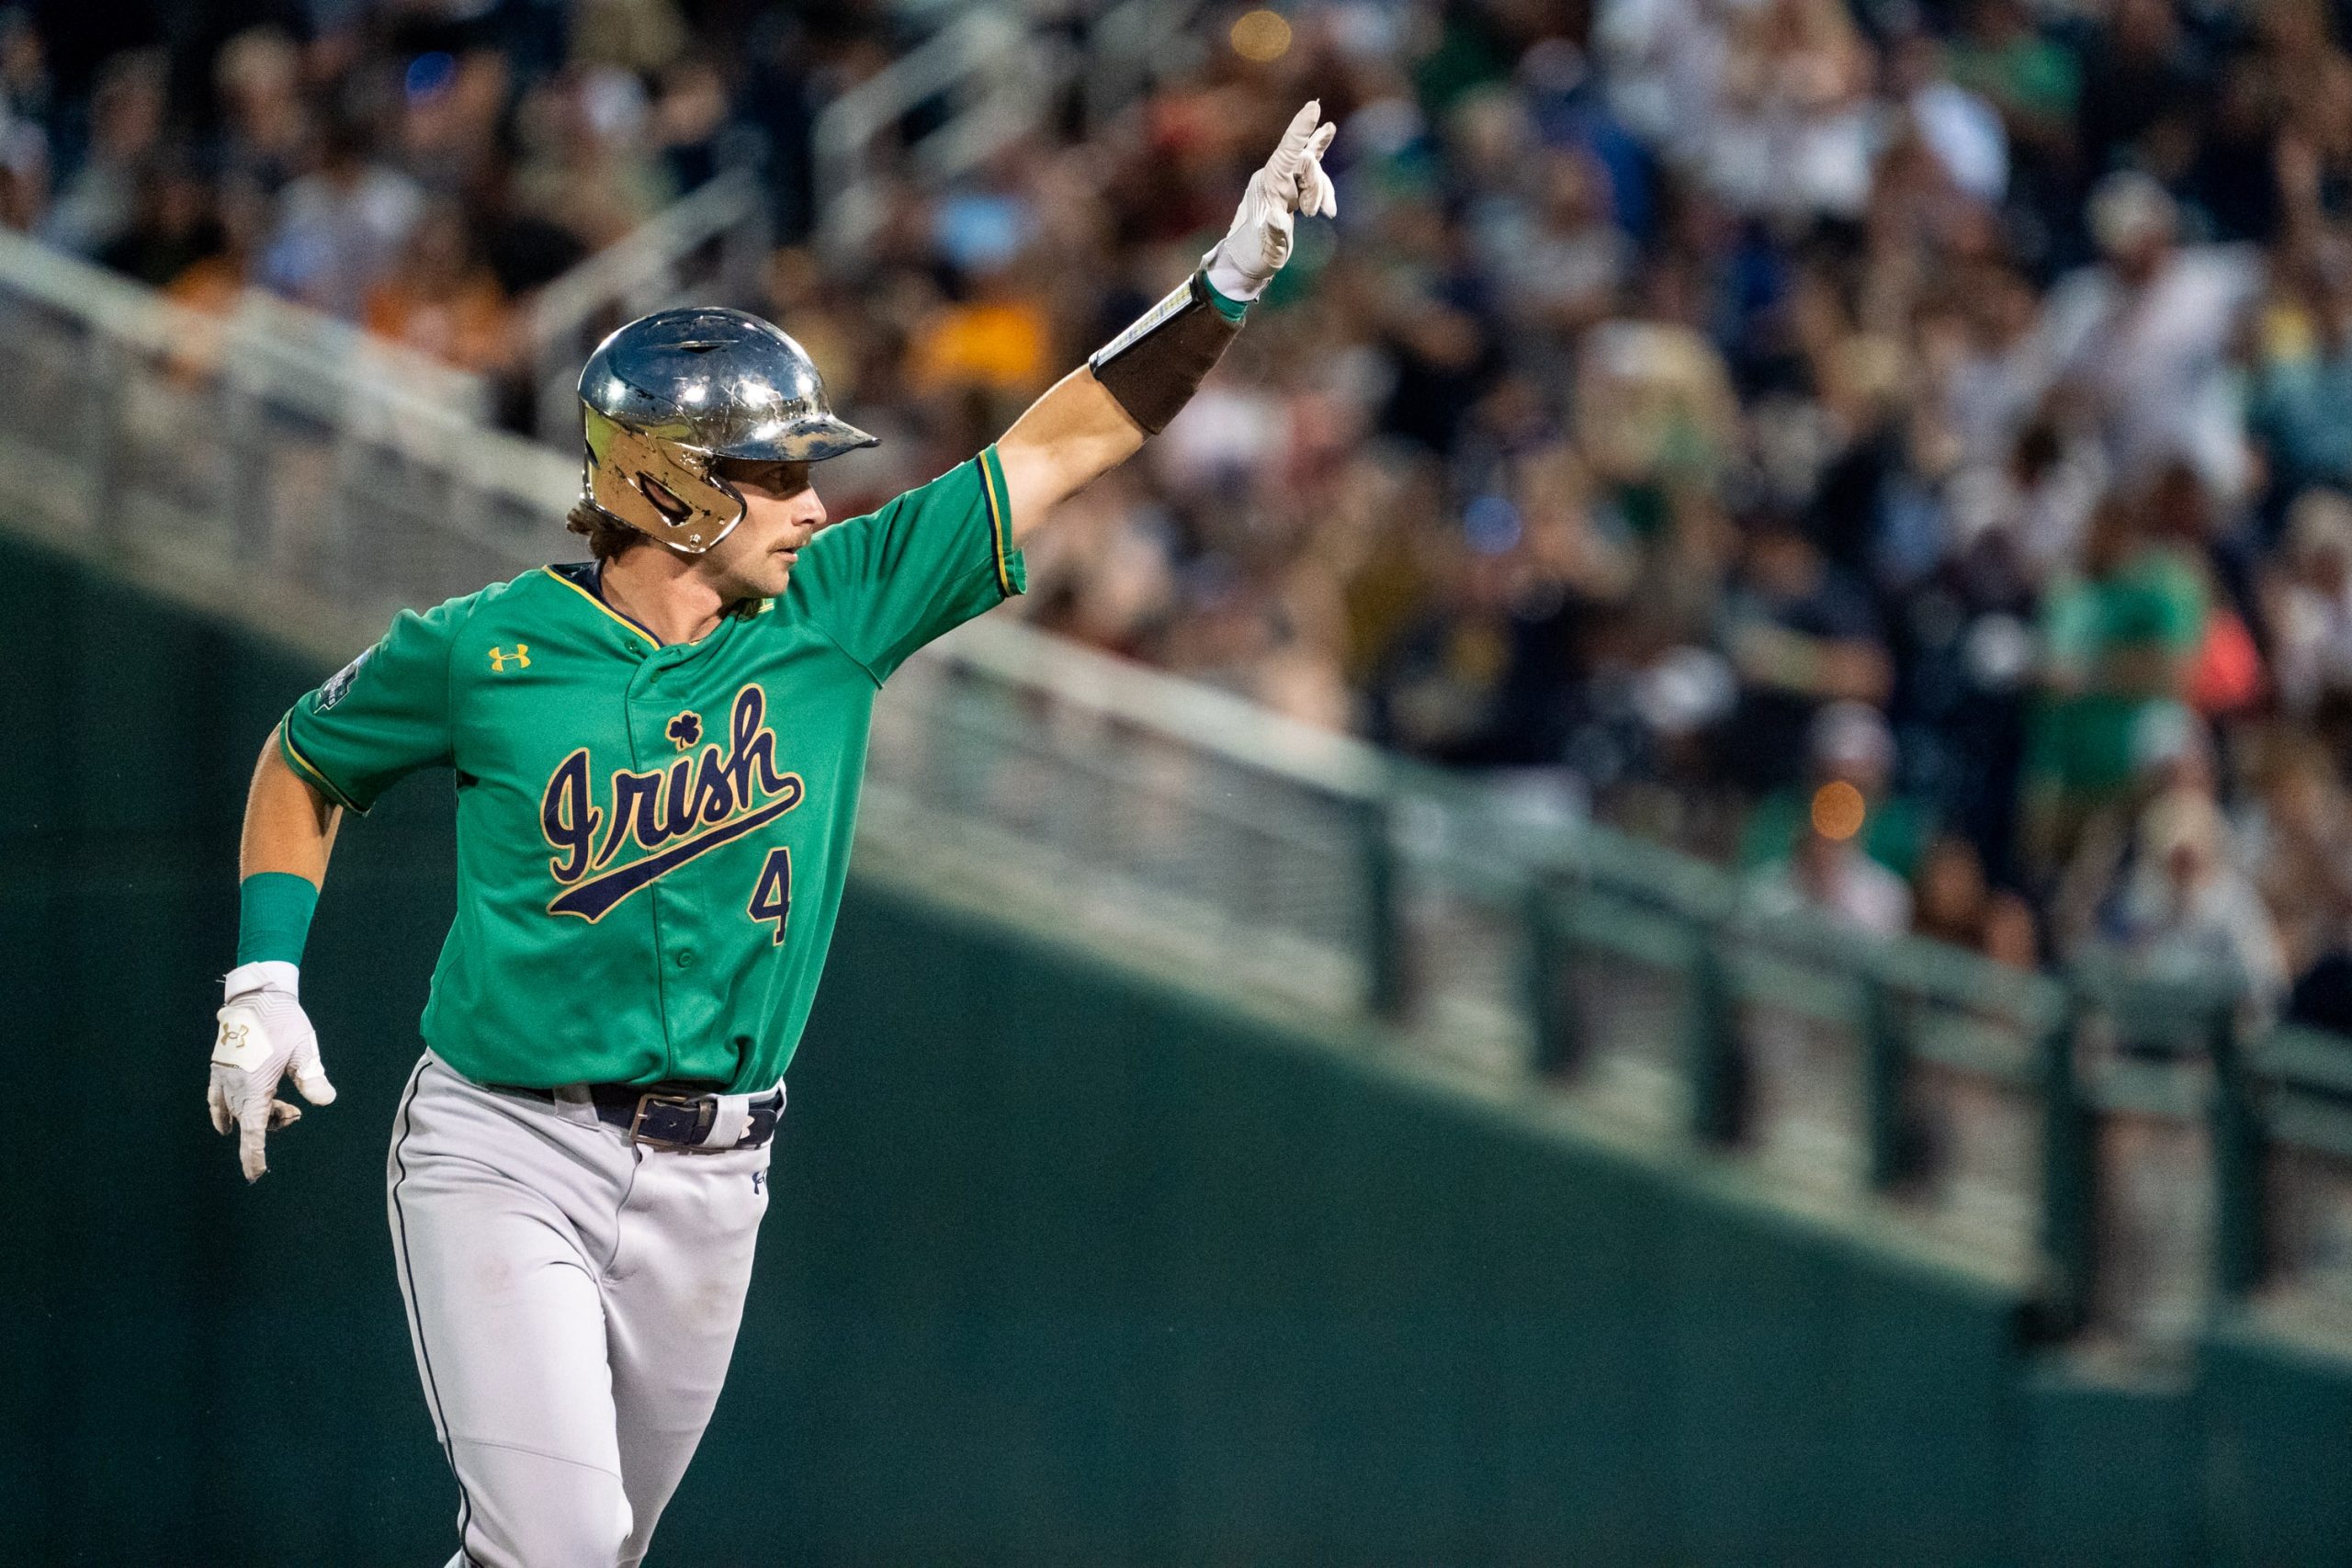 Notre Dame first baseman Carter Putz (4) gestures to the crowd after hitting a home run during the ninth inning at Charles Schwab Field